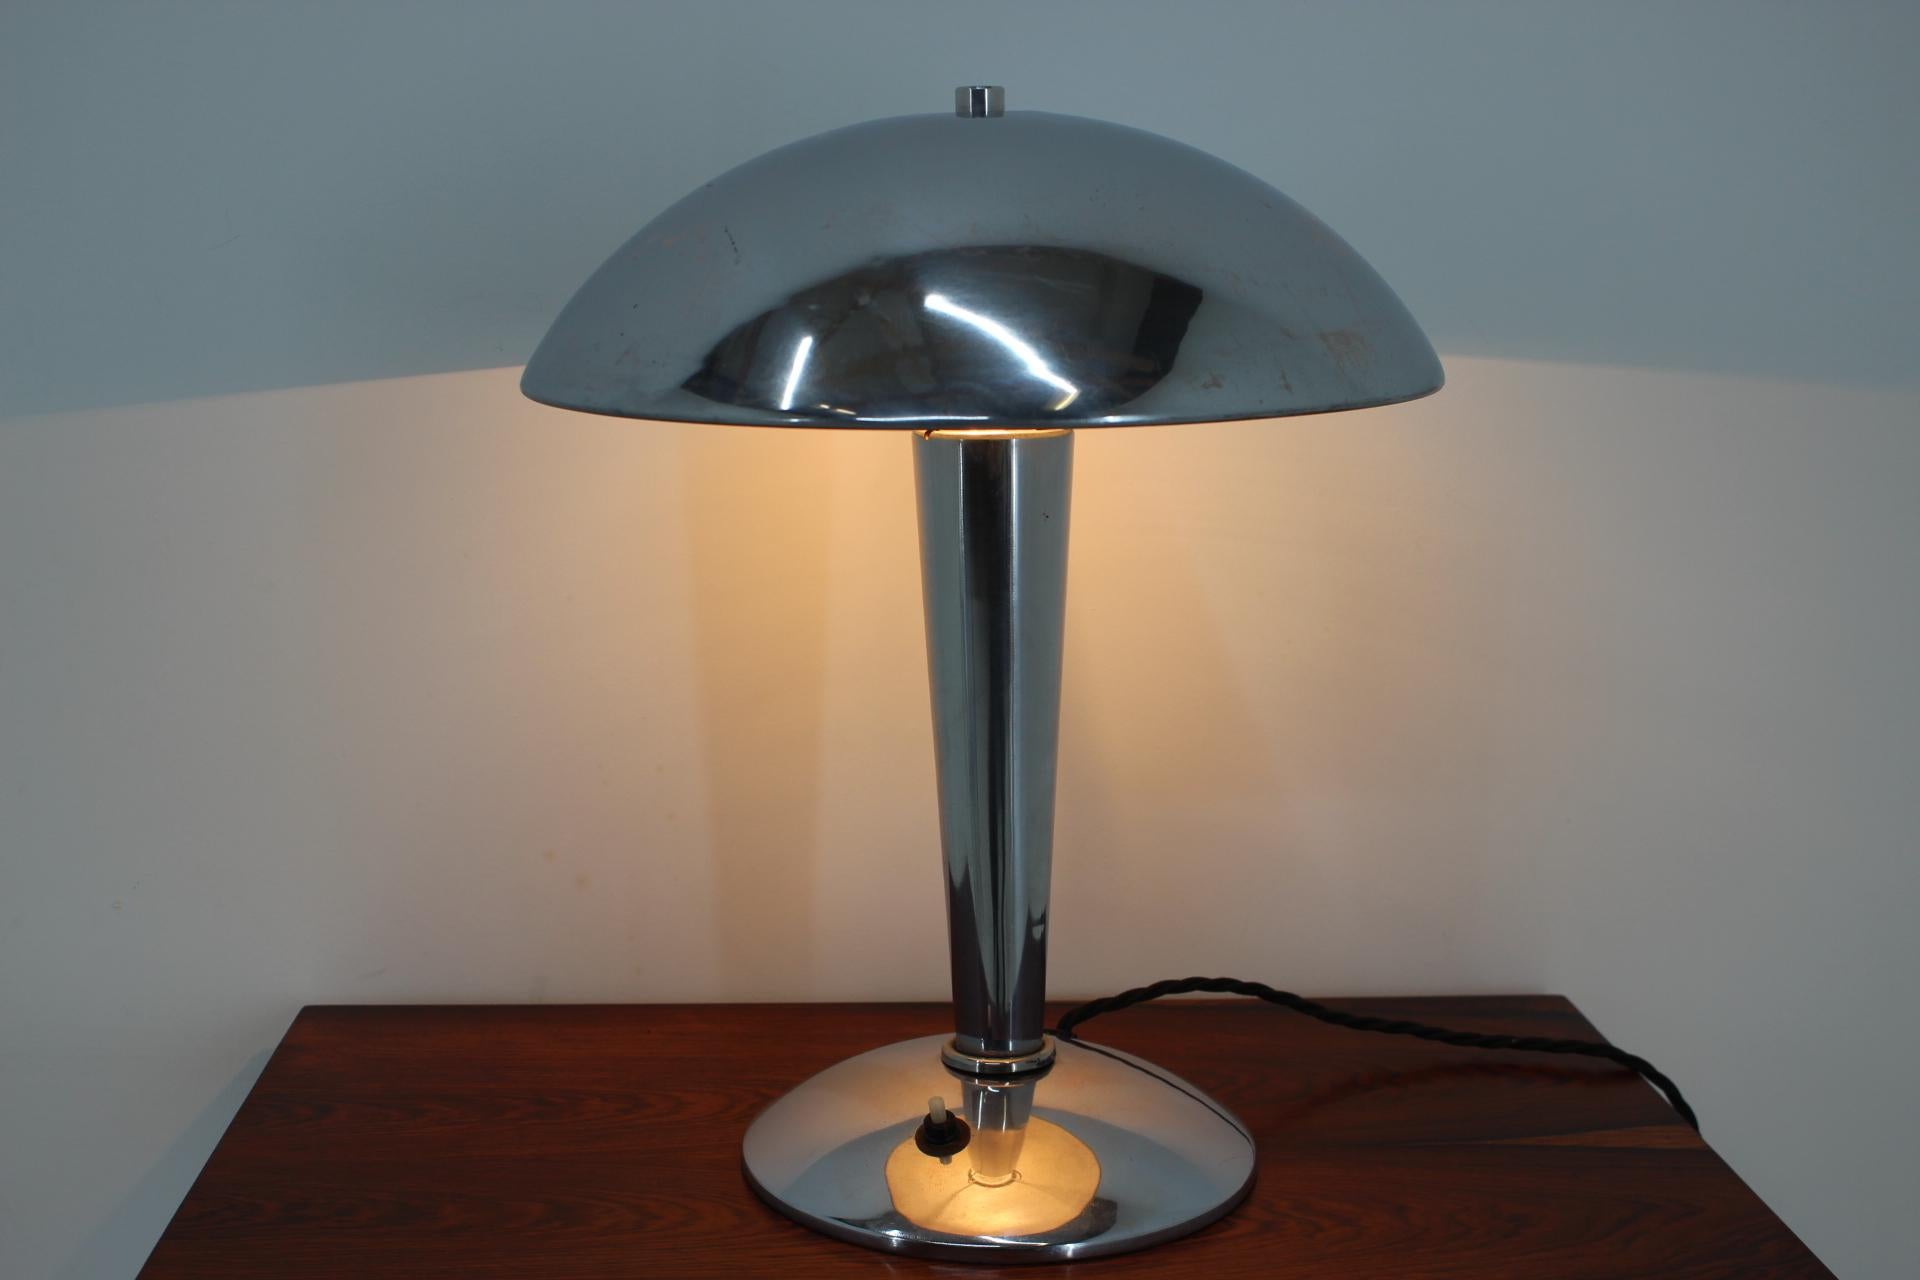 - 1930s
- Good original condition with patina
- Newly wired and polished.